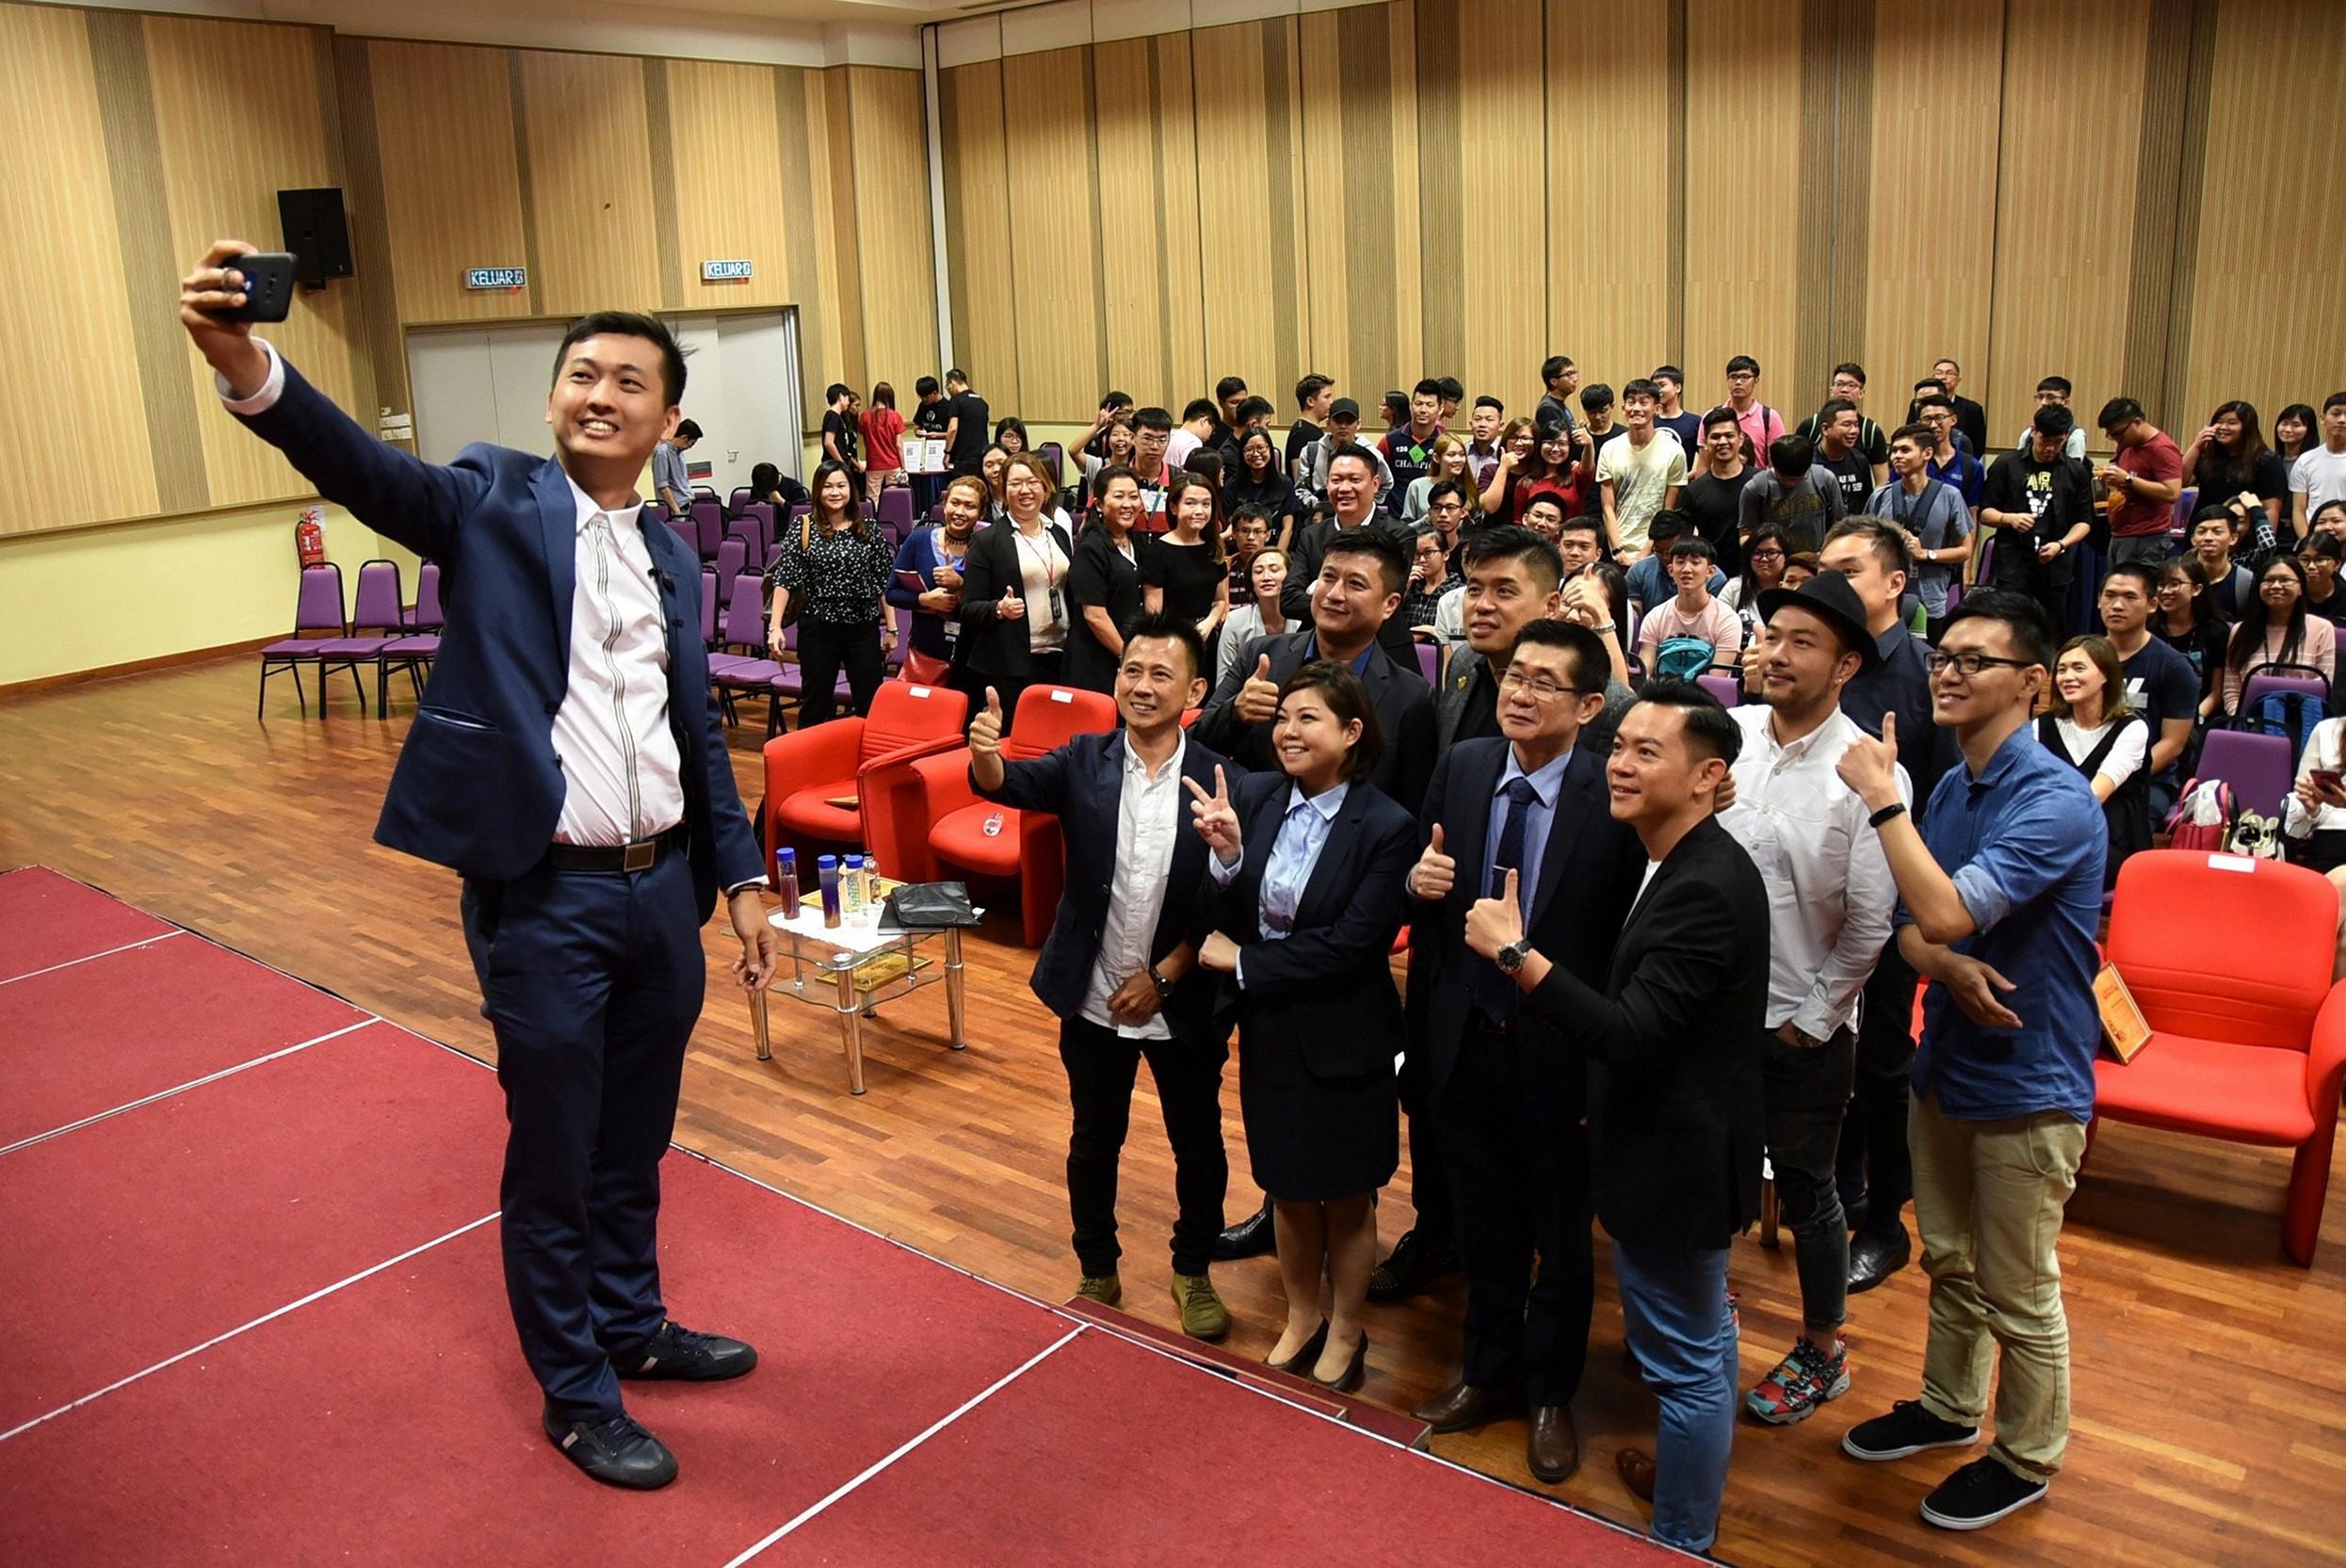 Koh taking “wefie” with all the invited speakers and participants